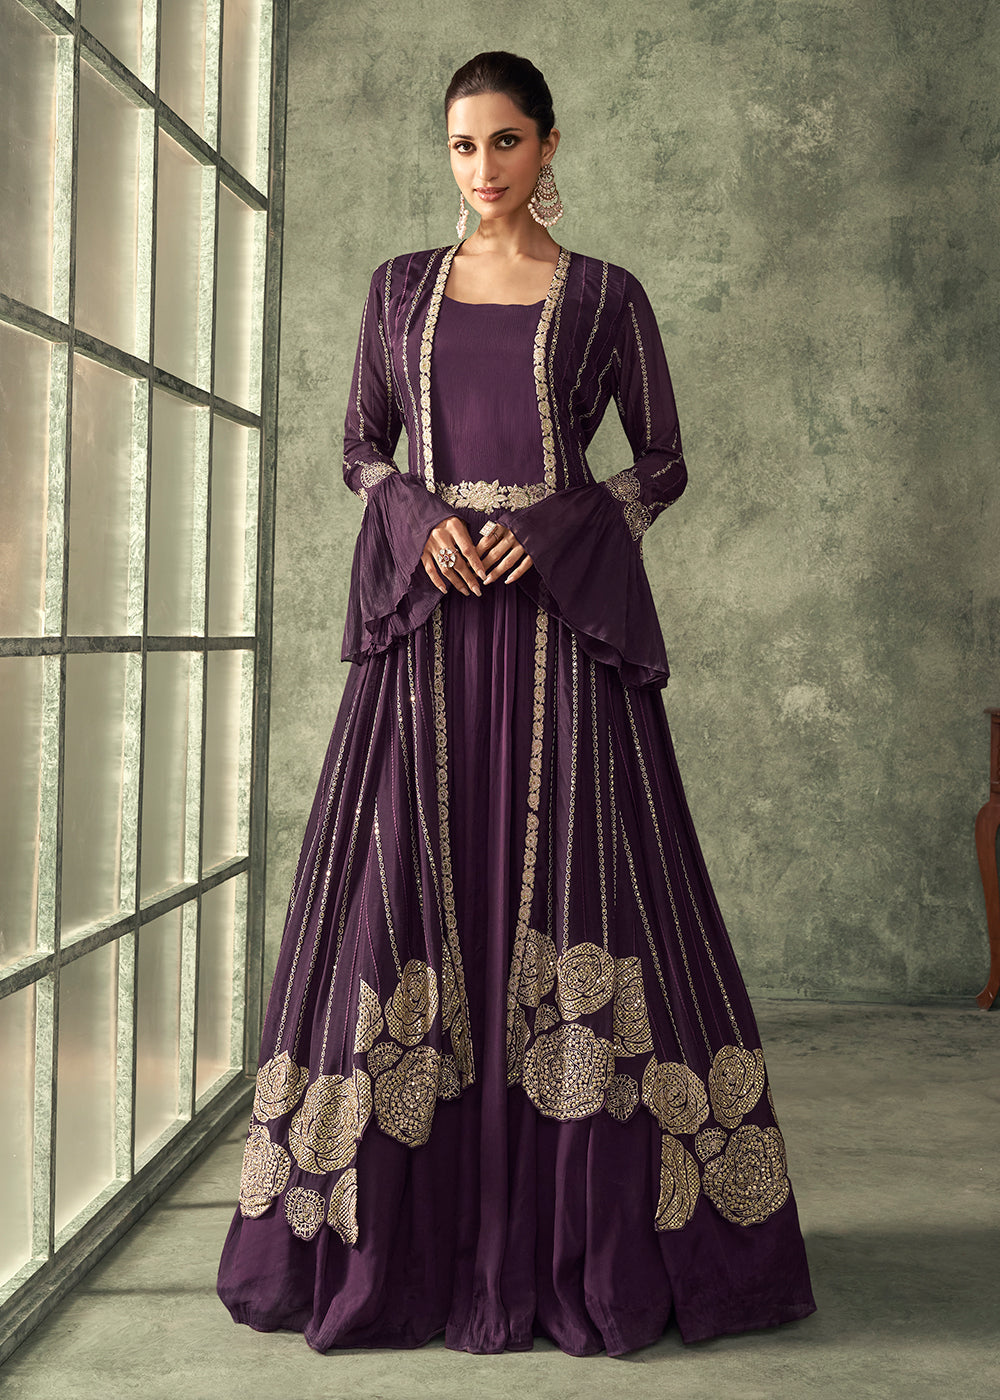 Buy Now Burgundy Wine Chinnon Embroidered Designer Gown with Shrug Online in USA, UK, Australia, New Zealand, Canada & Worldwide at Empress Clothing.